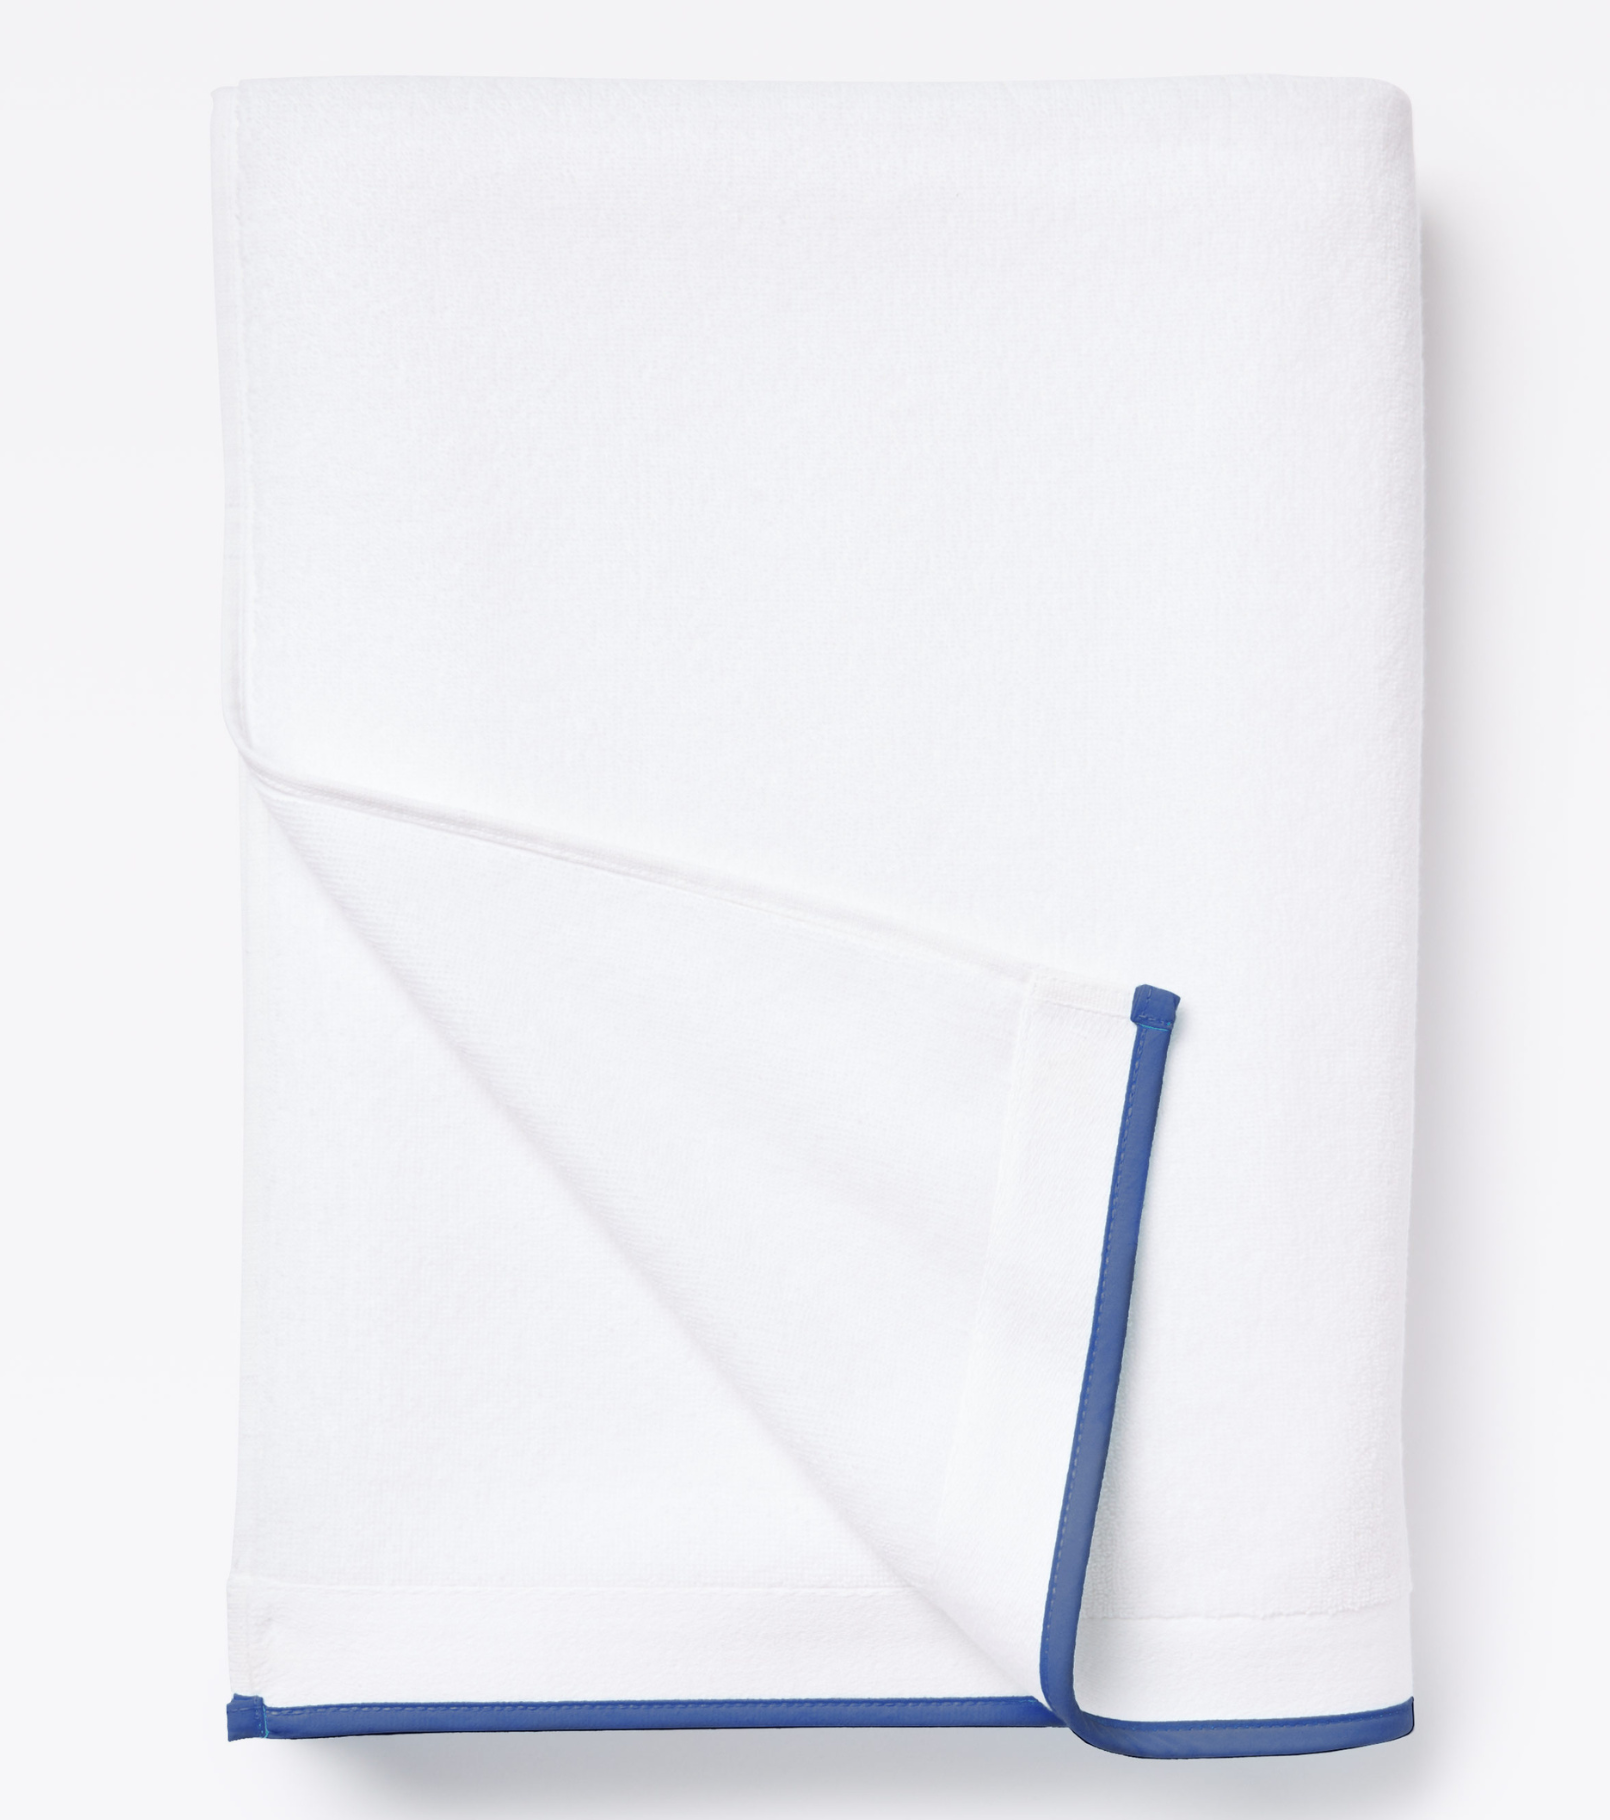 Averylily Border Bath Sheet in White with Ocean Blue trim, made from 600-gram weight pure Aegean cotton.